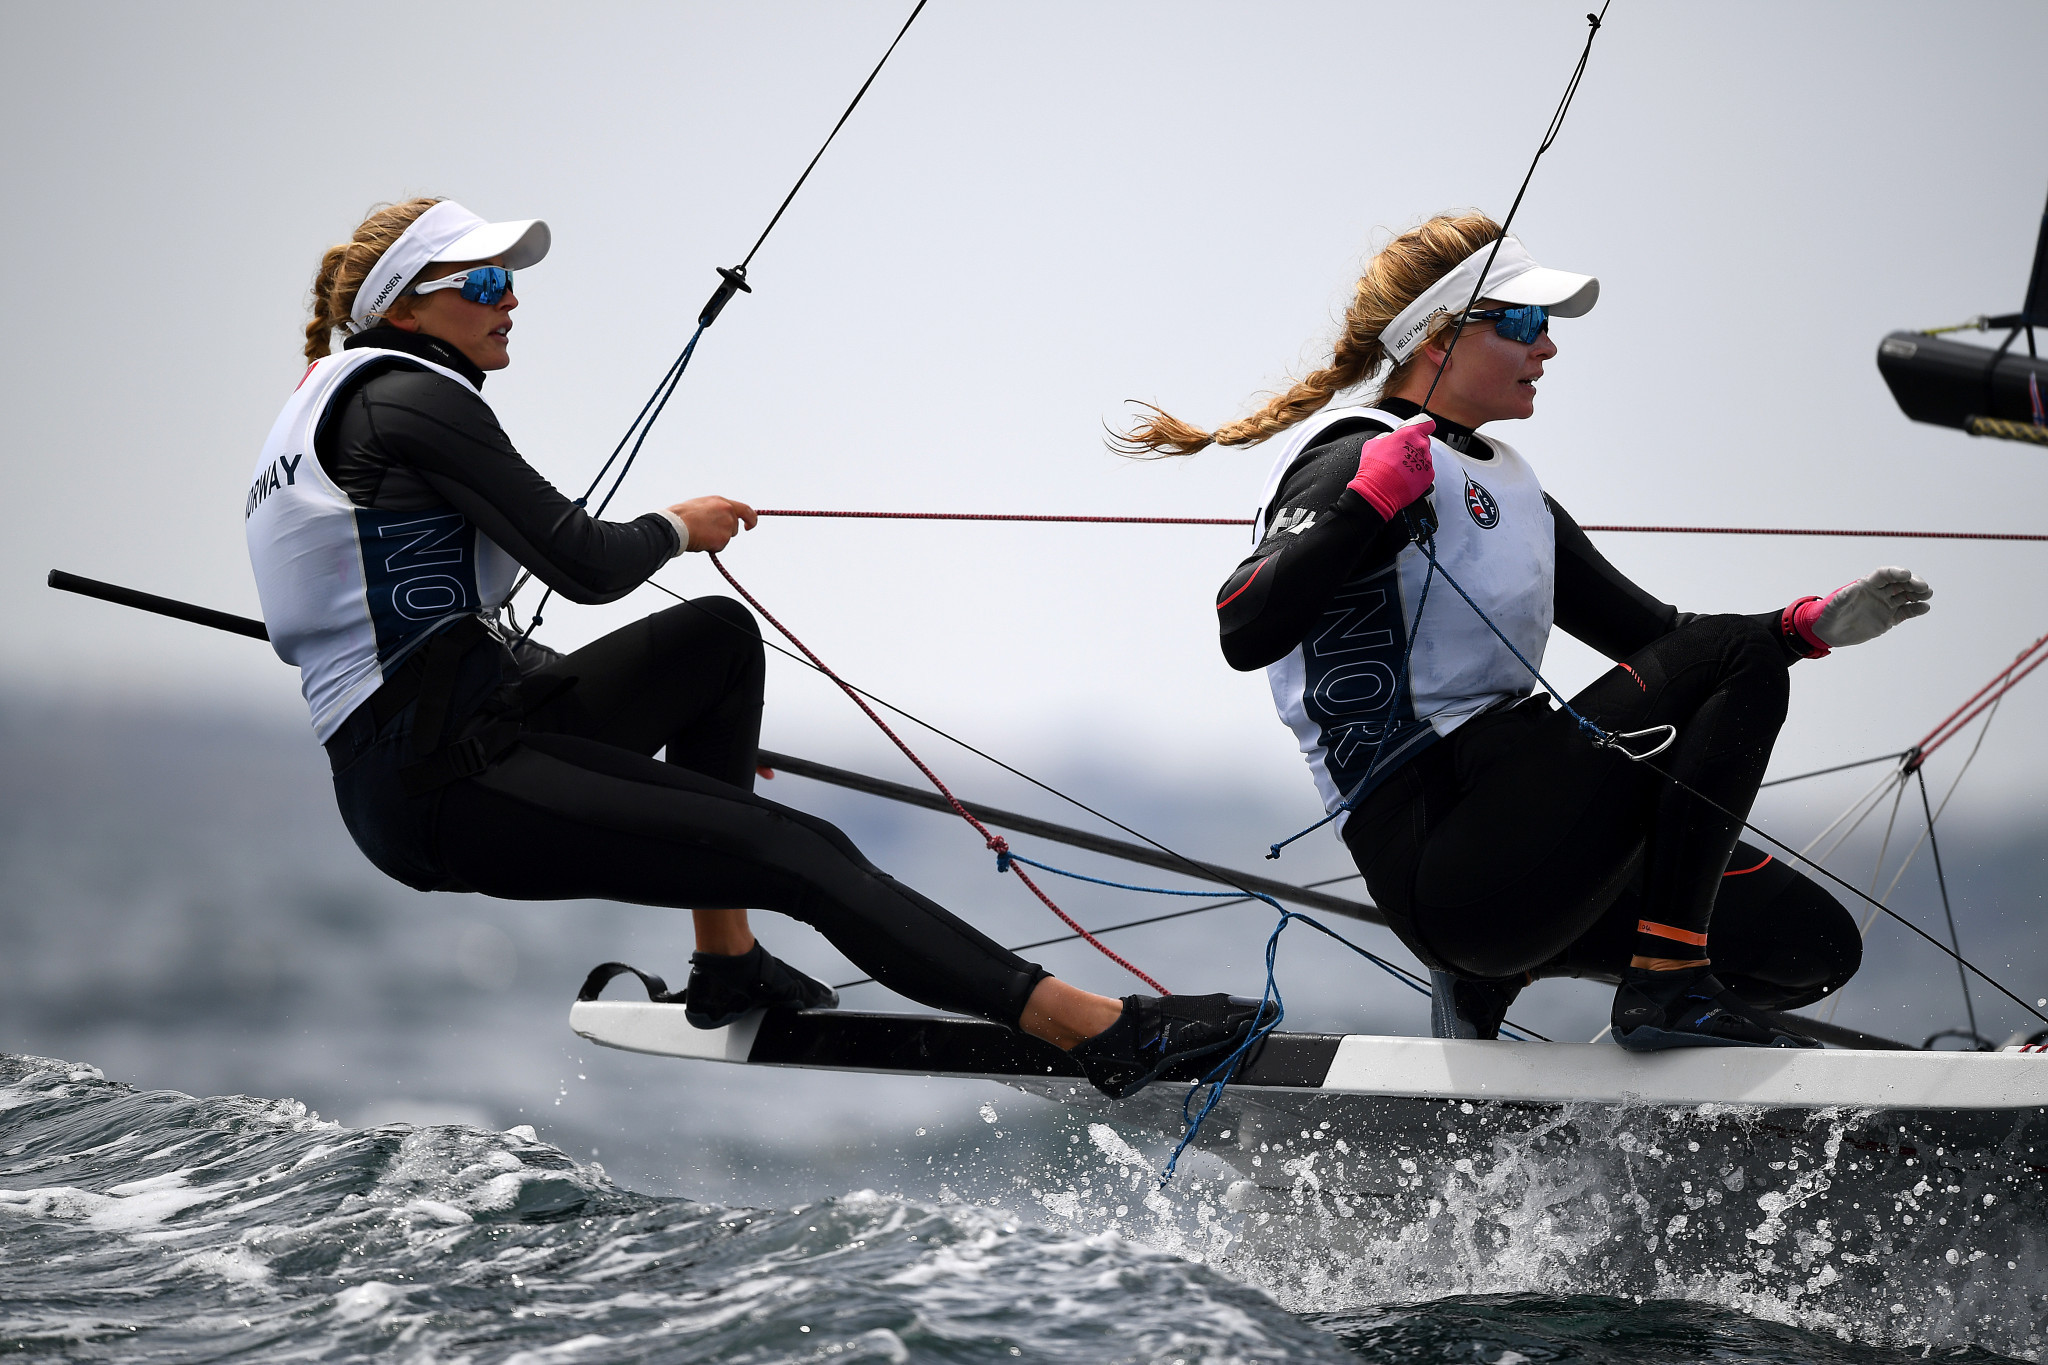 Norway's Helene Næss and Marie Rønningen lead the 49er FX class ©Getty Images